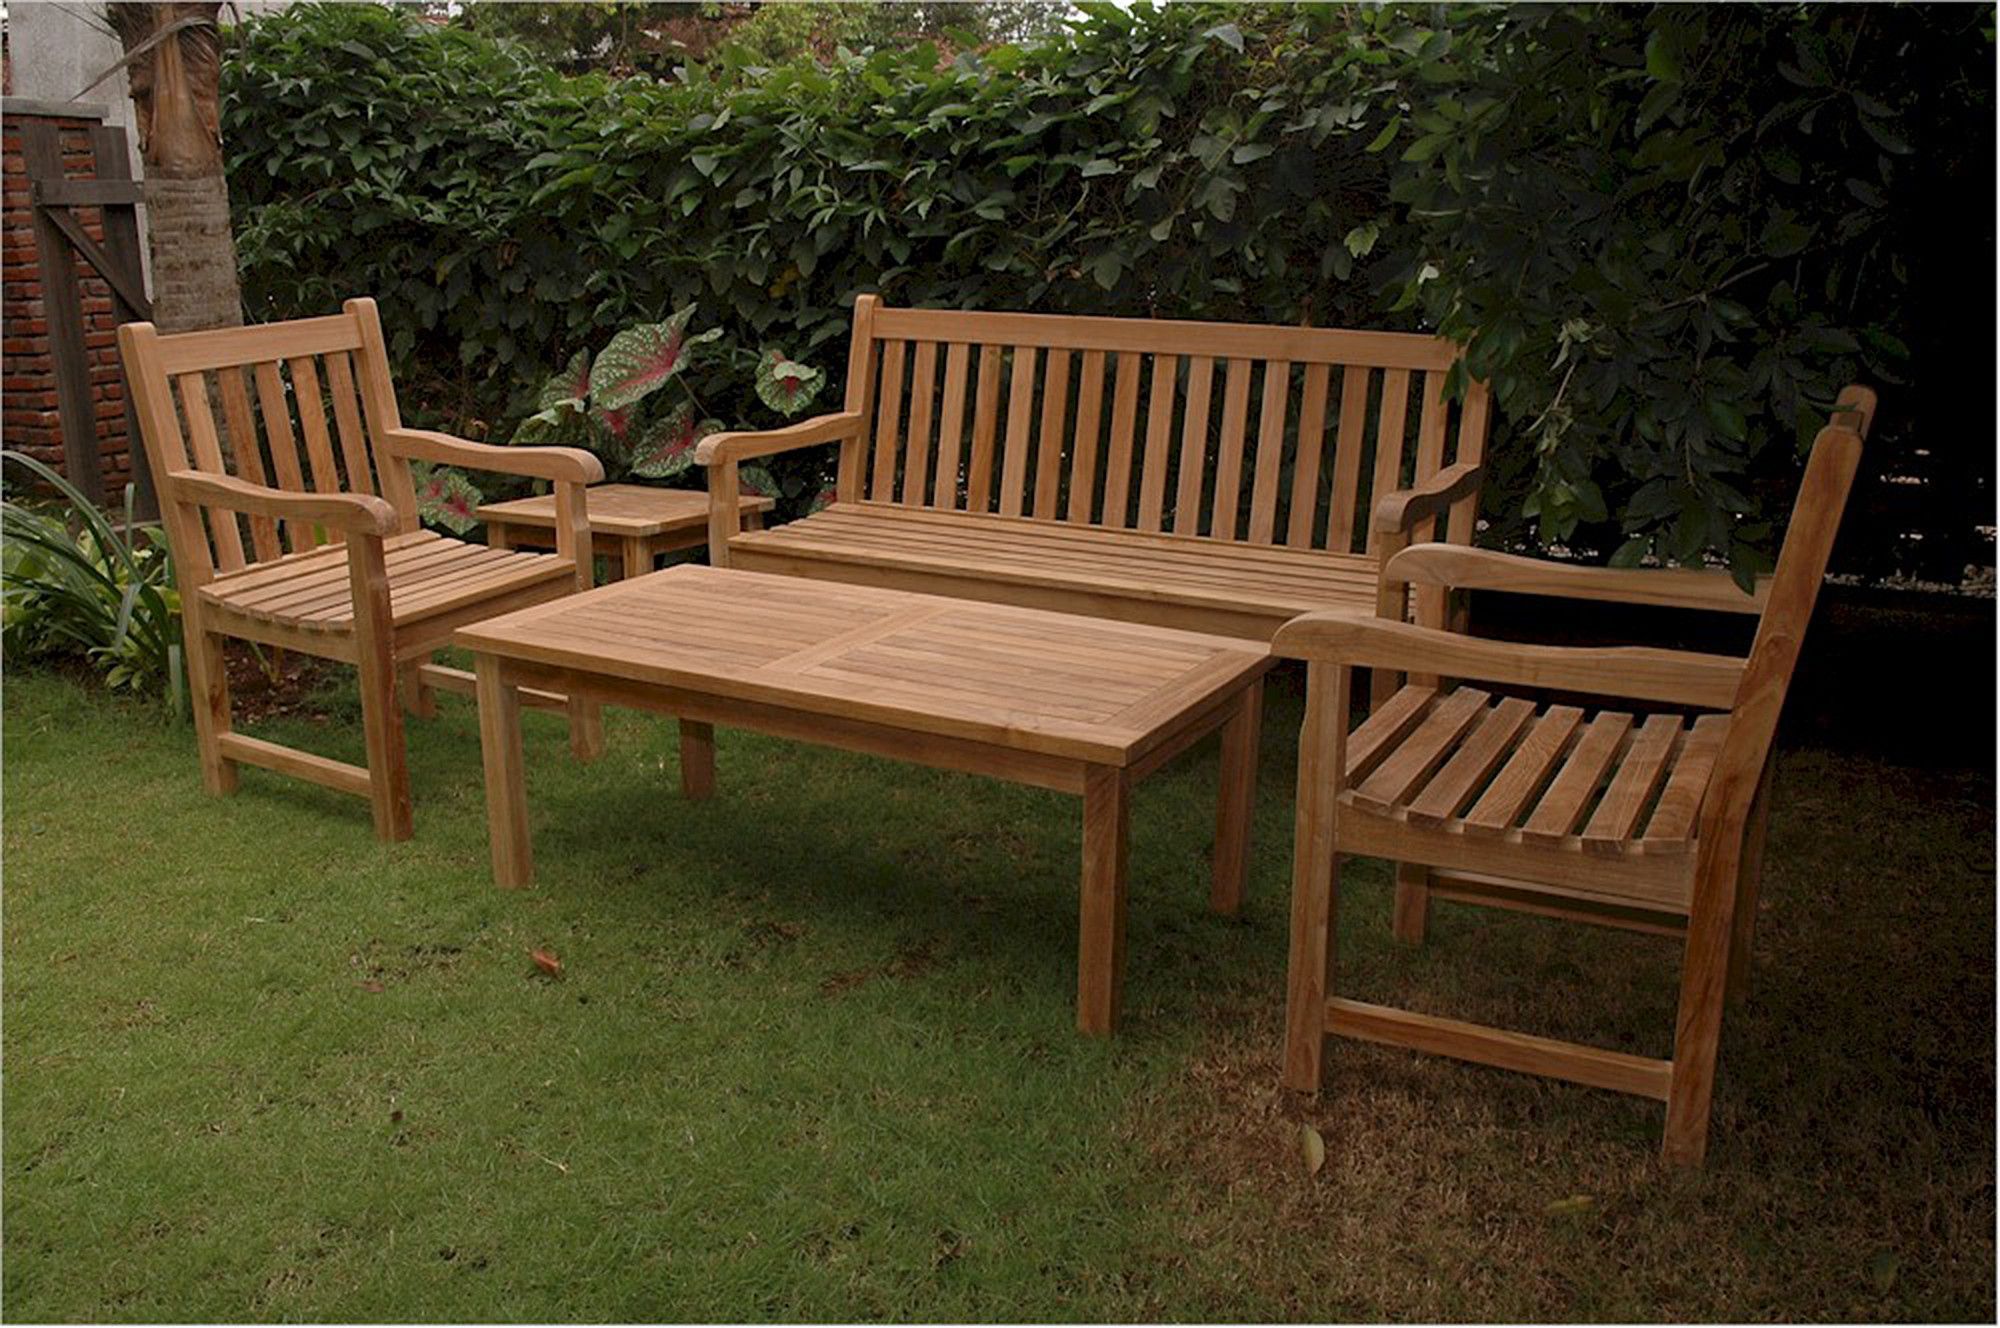 The Benefits Of Teak Furniture Over Other Woods